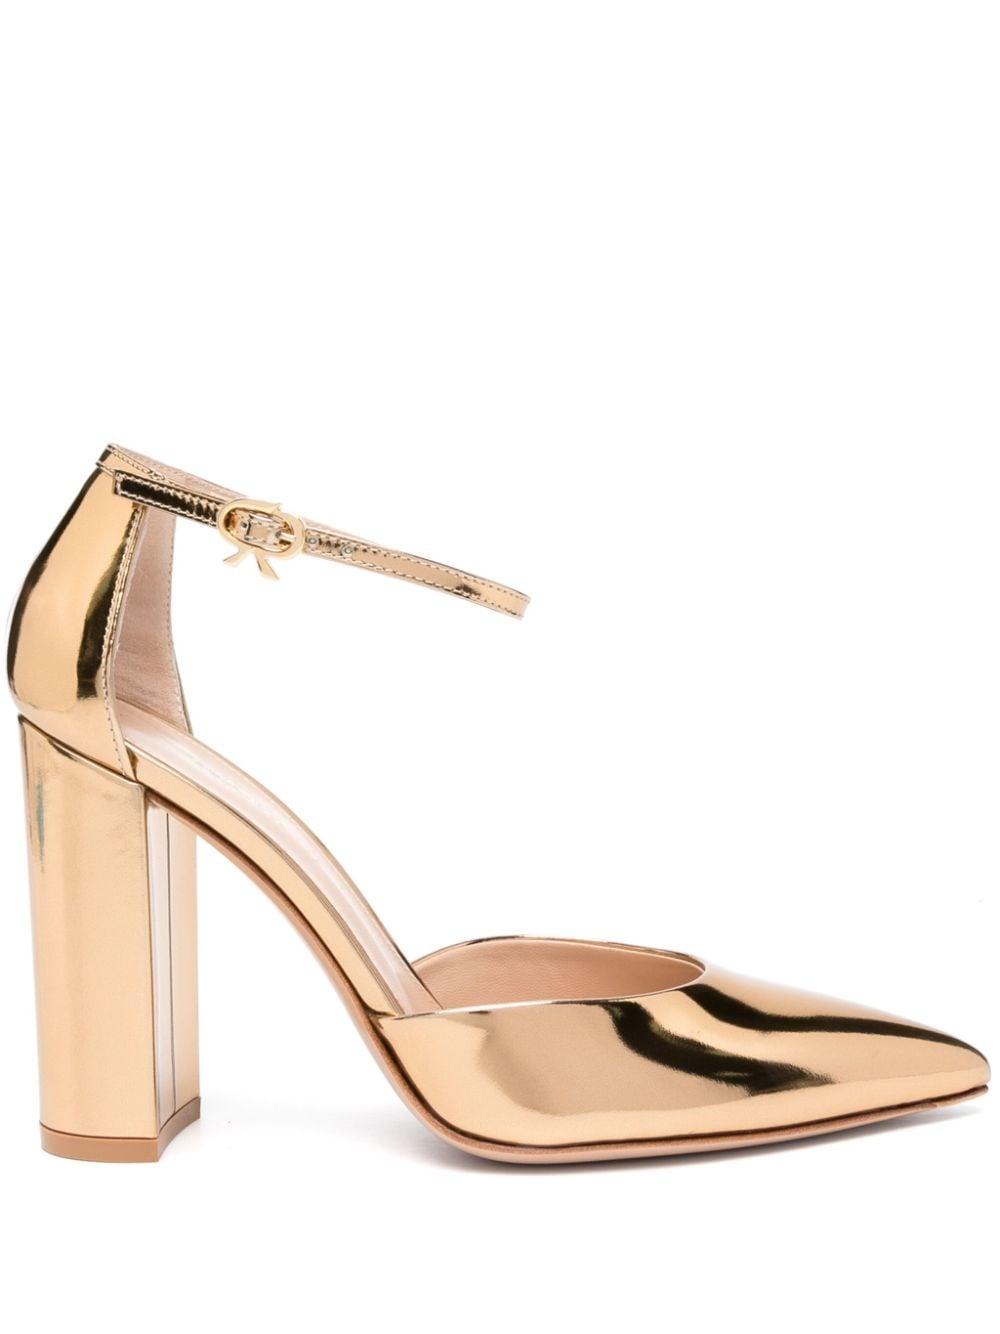 Gianvito Rossi Piper Anklet Metallic-leather Pumps in Natural | Lyst